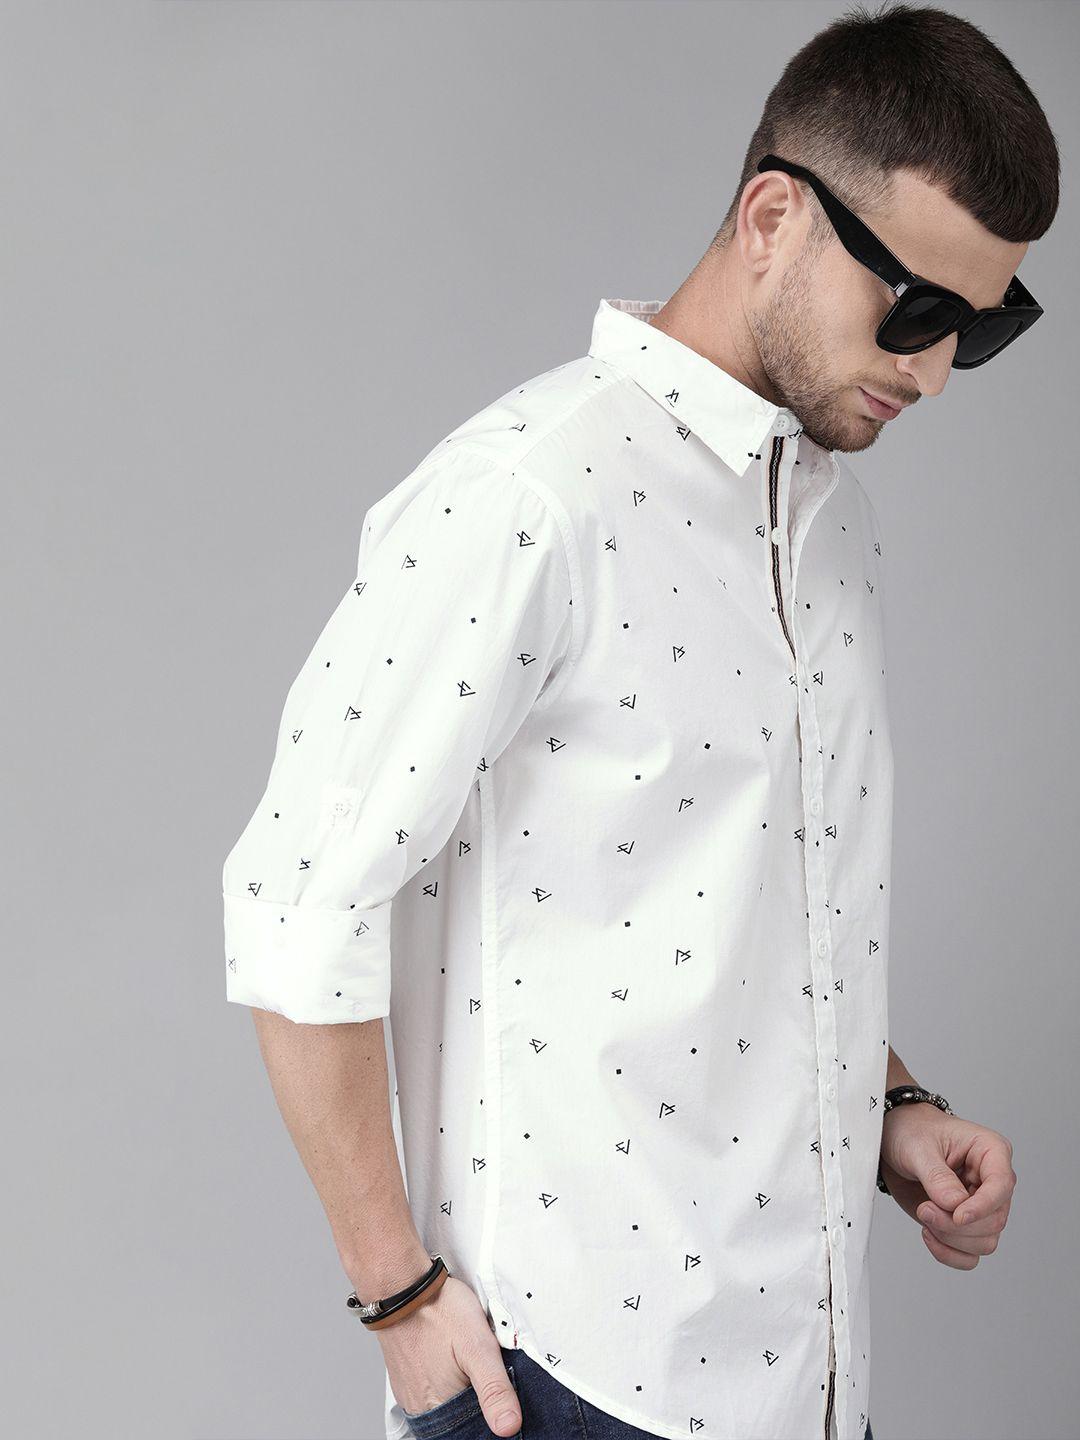 roadster men white & black geometric printed pure cotton sustainable casual shirt